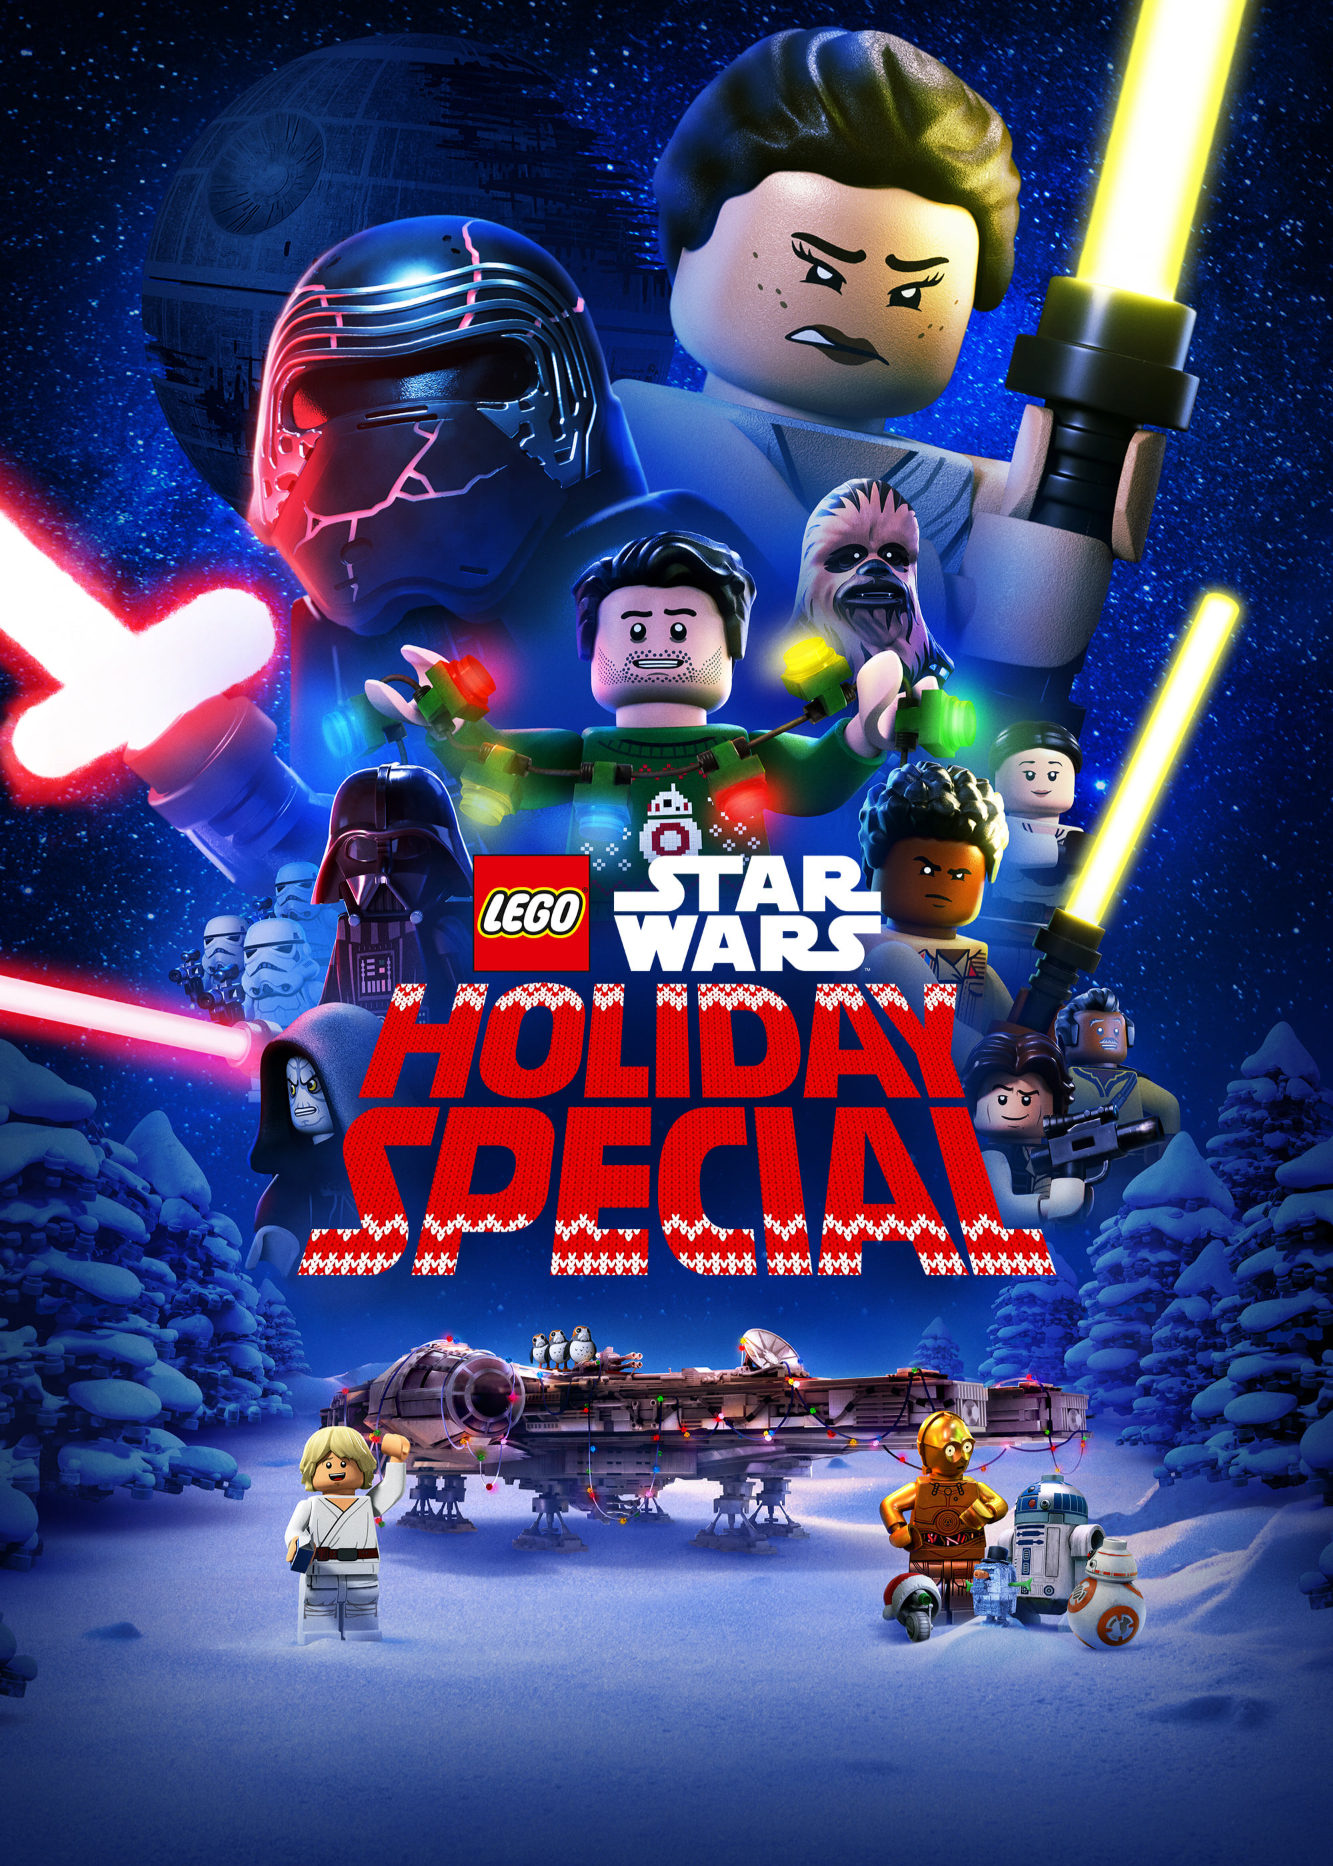 Poster Phim The Lego Star Wars Holiday Special (The Lego Star Wars Holiday Special)